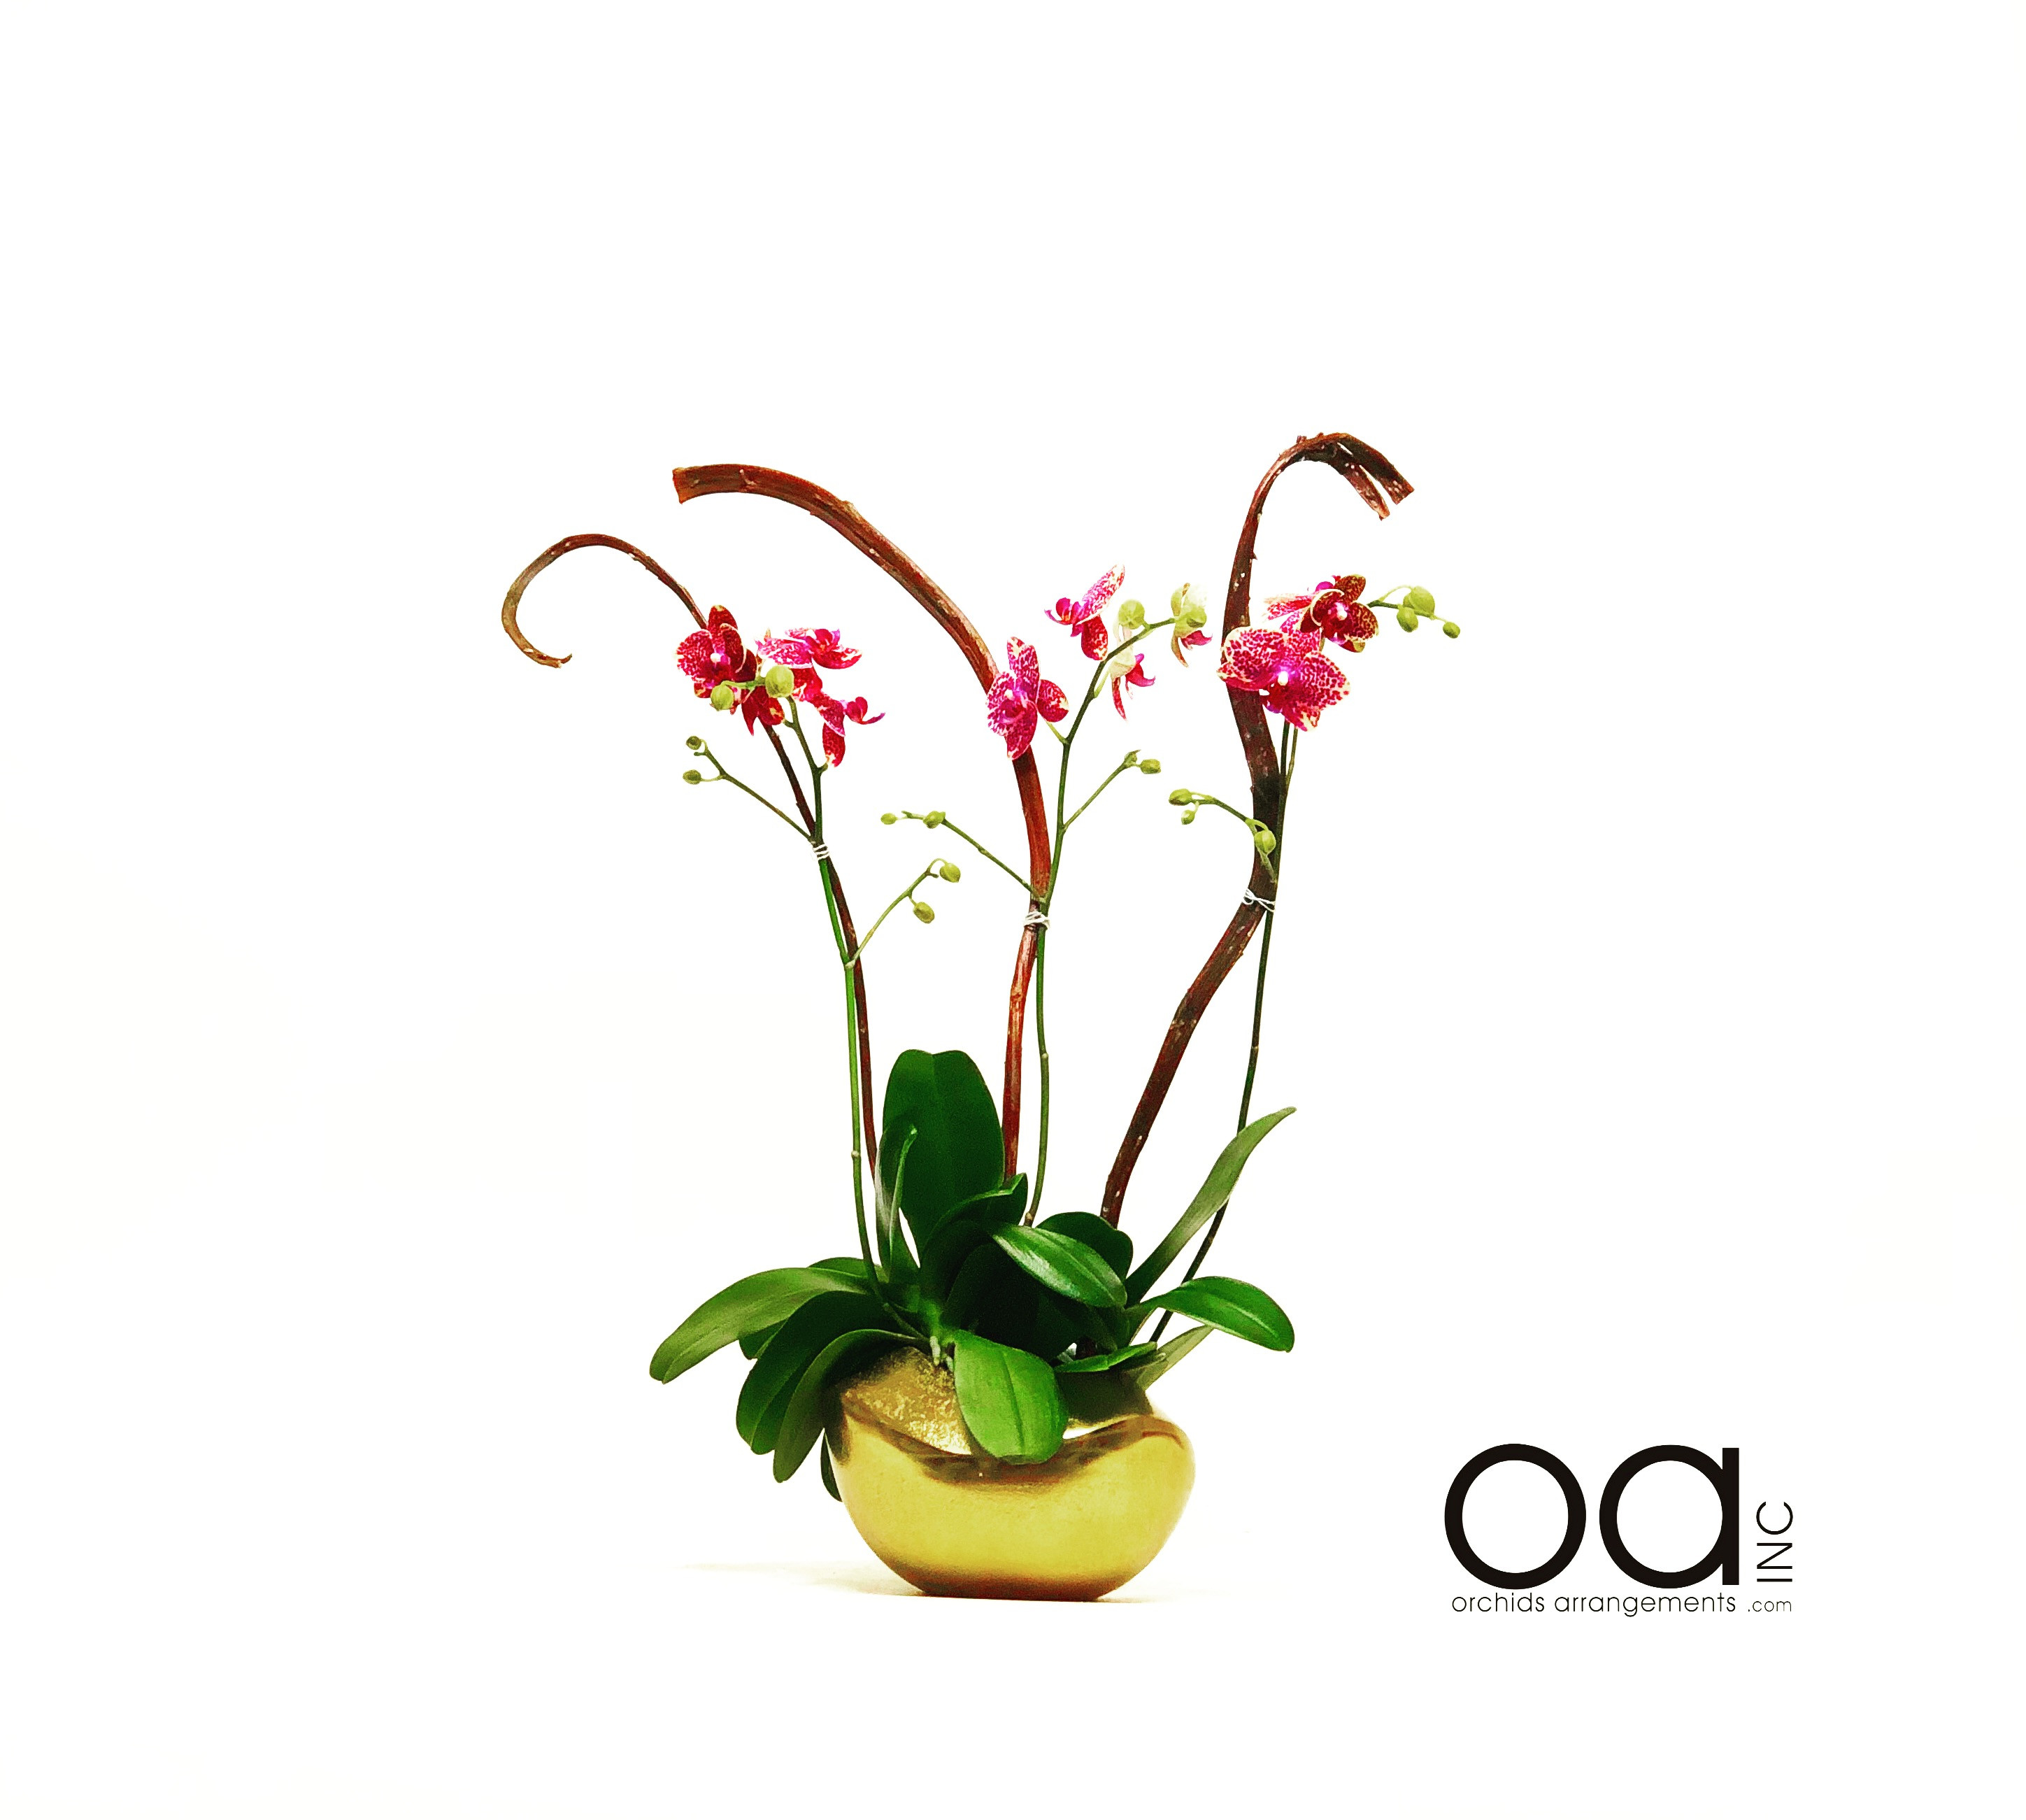 29 Cute orchid Arrangements In Glass Vases 2023 free download orchid arrangements in glass vases of https orchidsarrangements com miami orchids arrangements inc in 20180714043811 file 5b4a26f3f353b